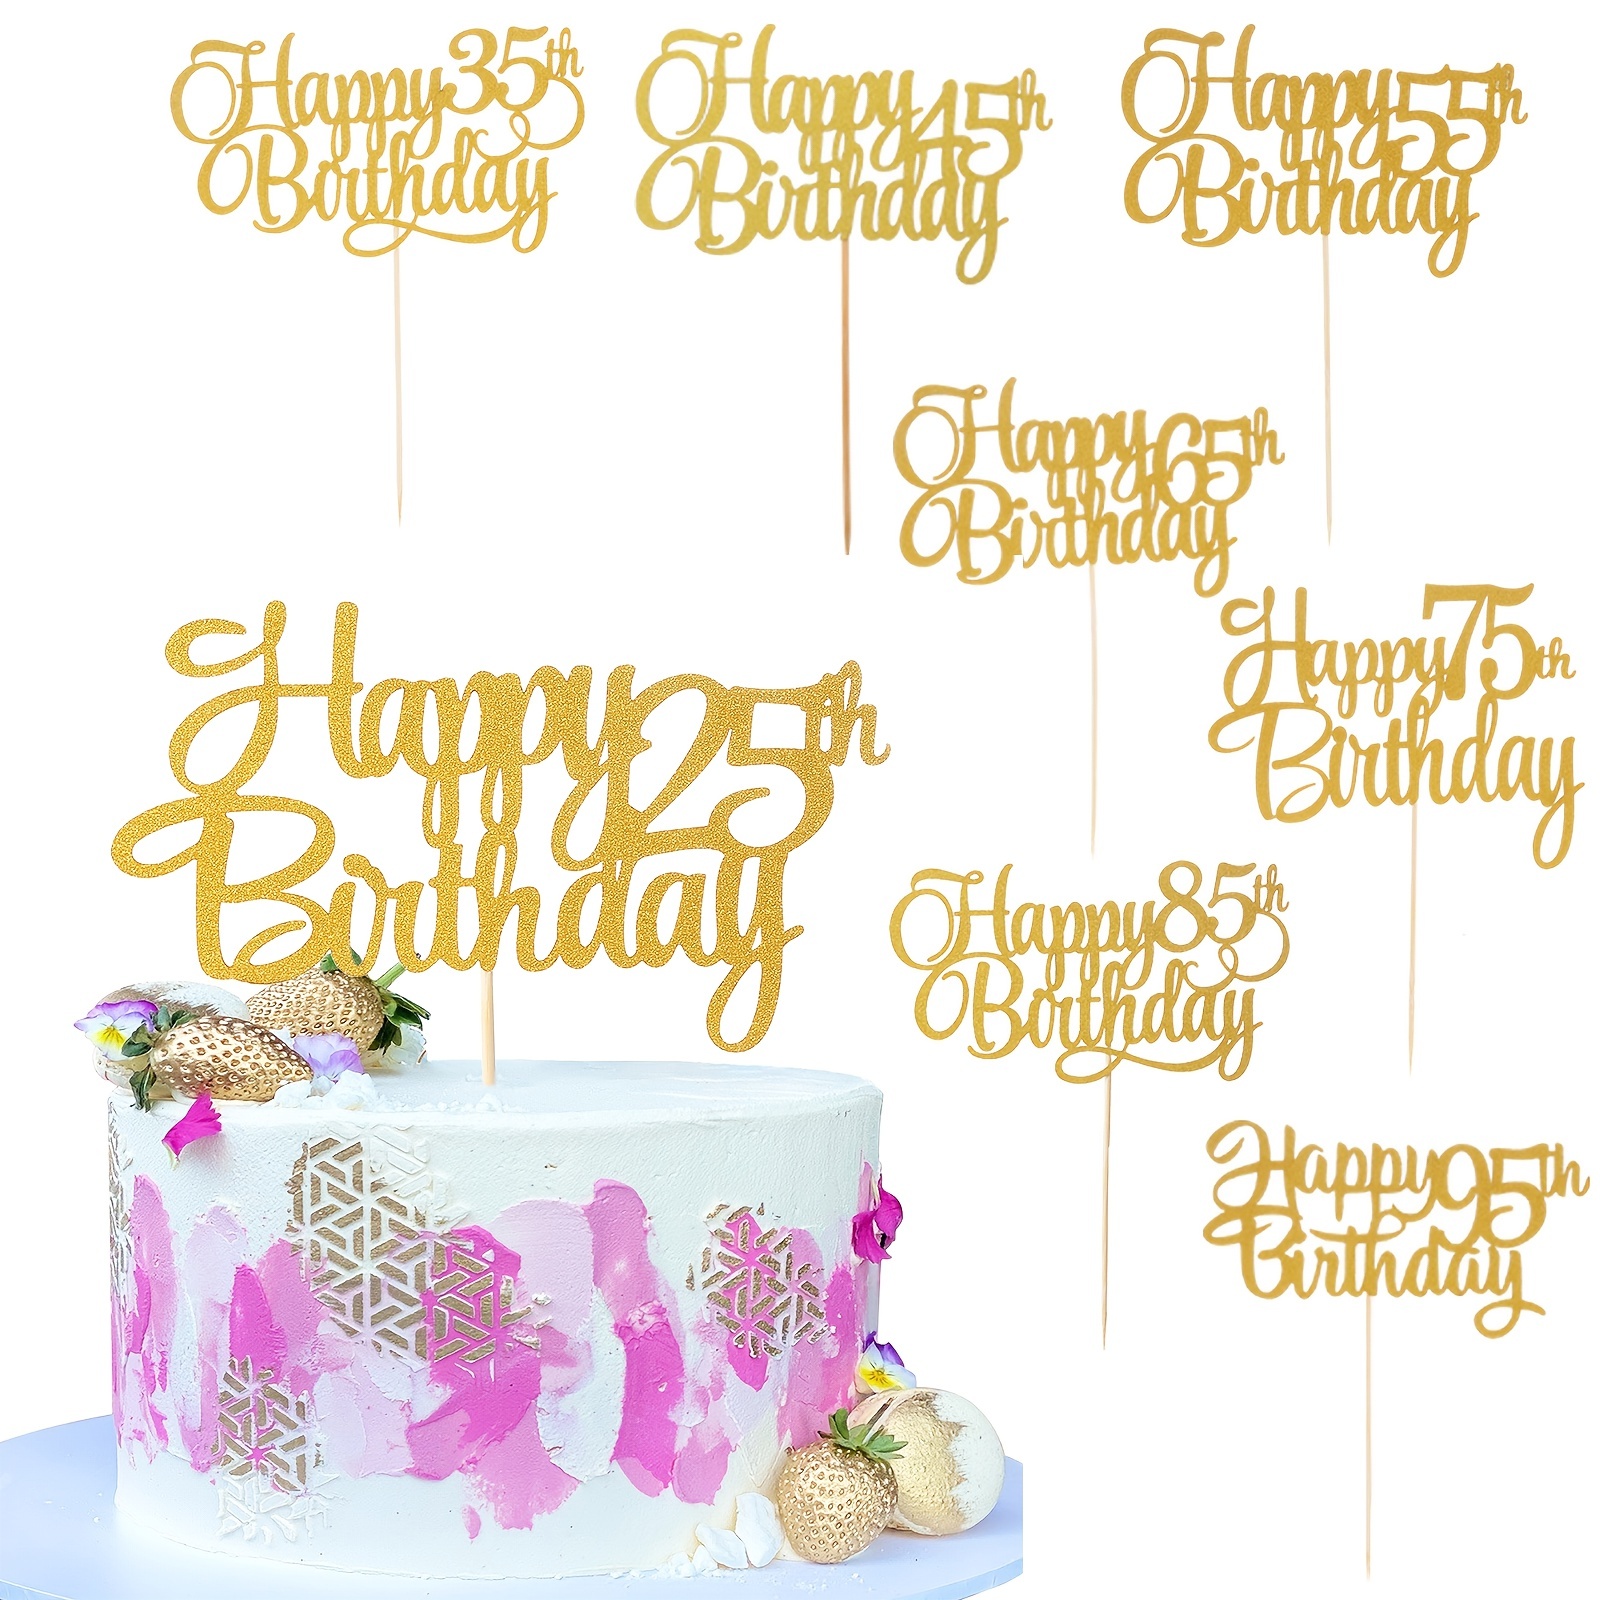 Happy Birthday Elf Cake Insert: Add a Magical Touch to Your Party Cake  Decorations!